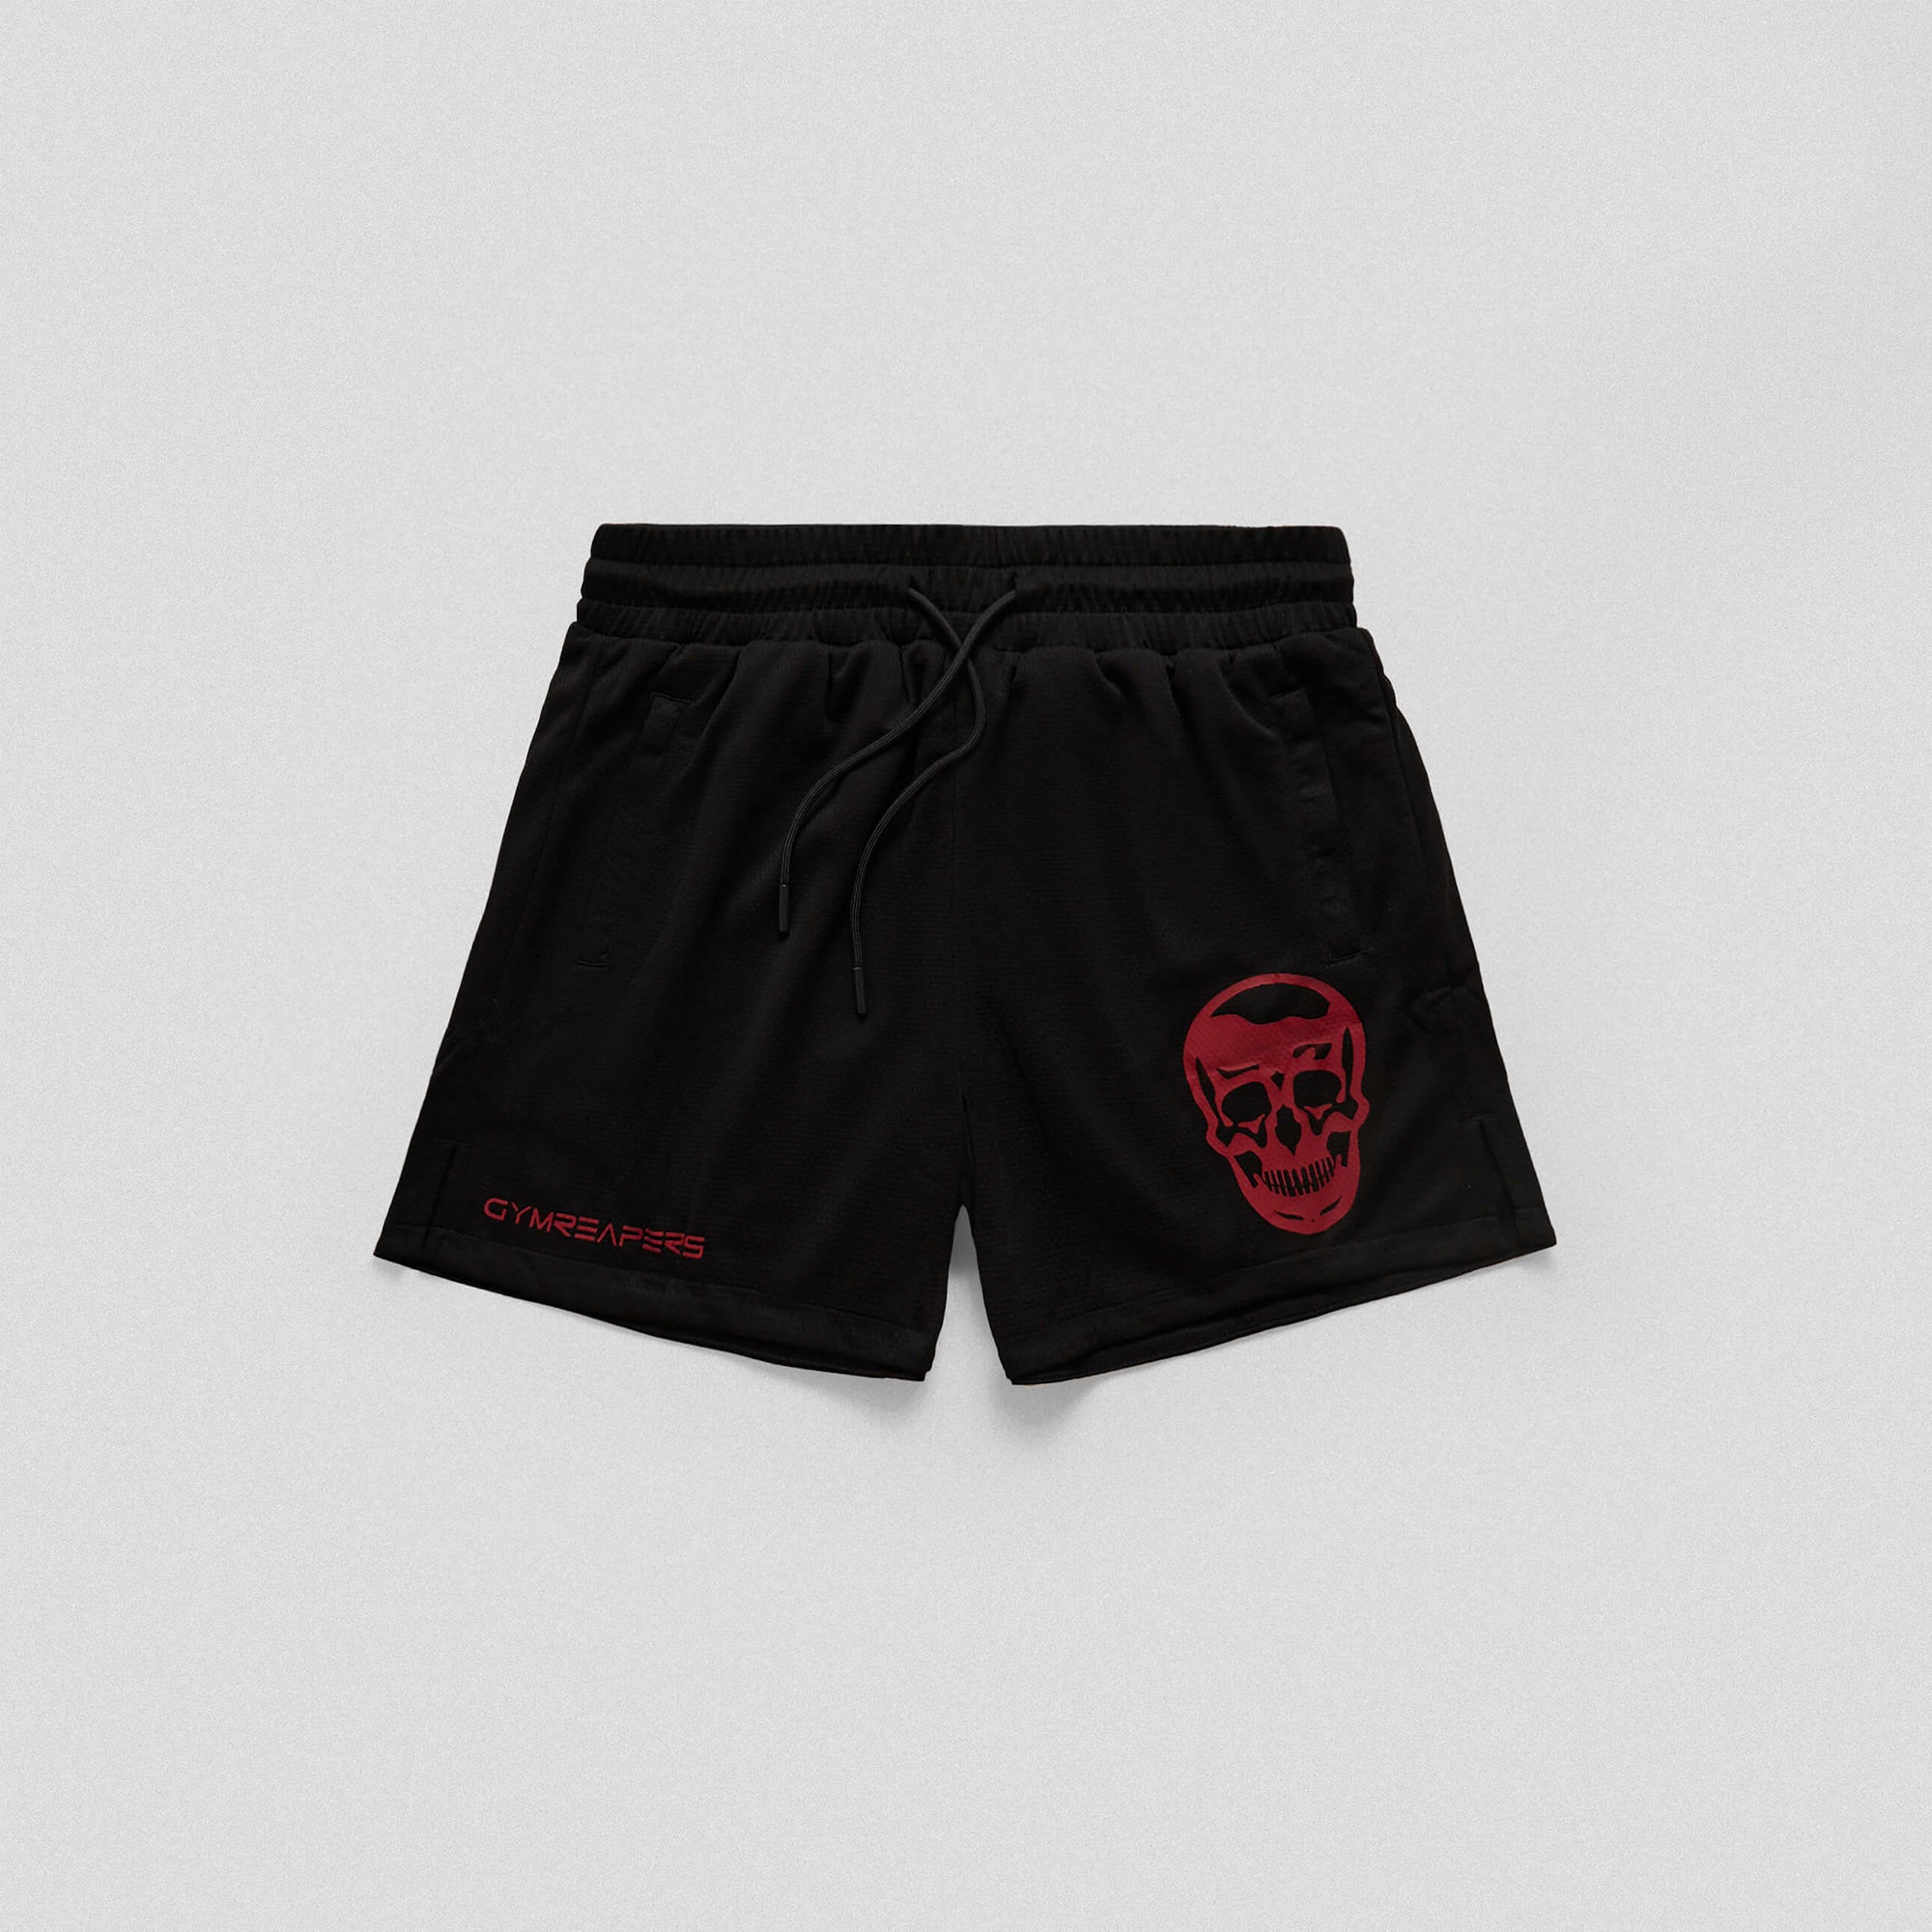 mesh shorts black red front